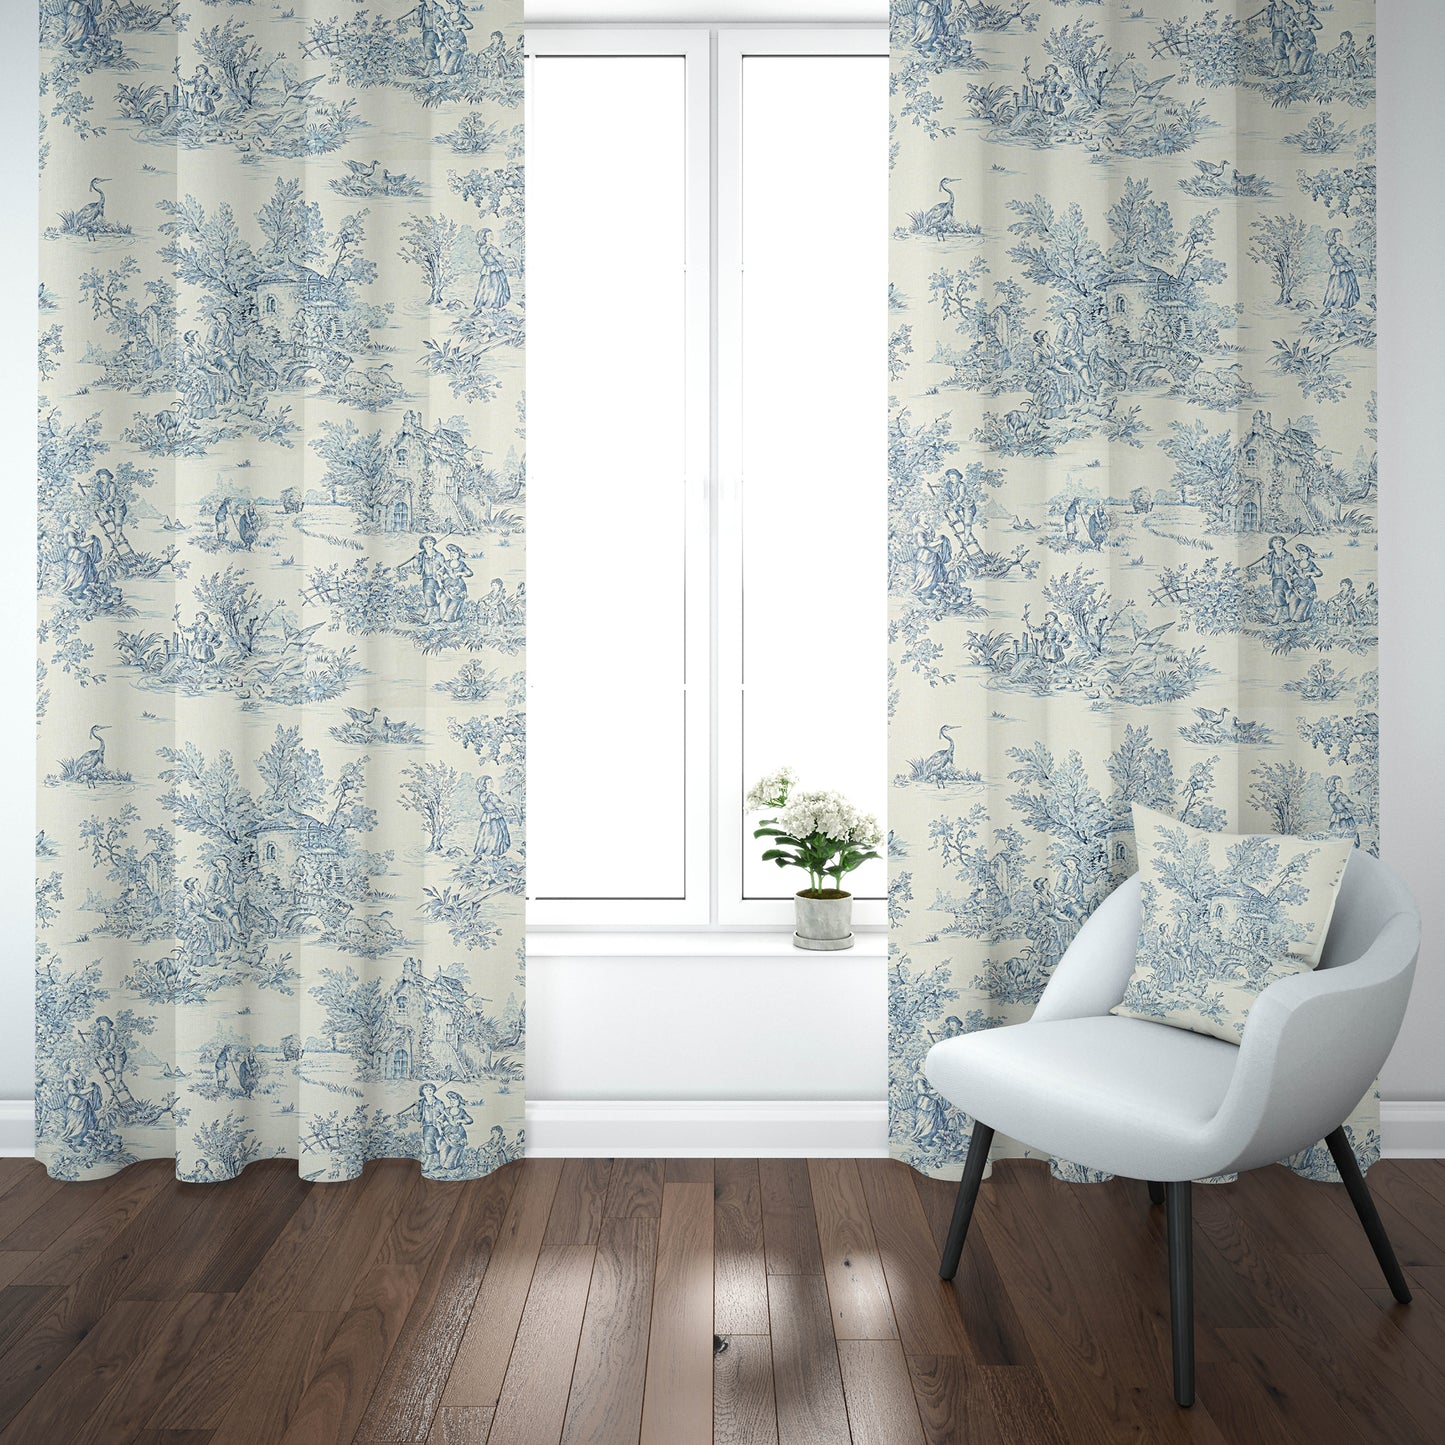 Tab Top Curtain Panels Pair in Pastorale #2 Blue on Cream French Country Toile